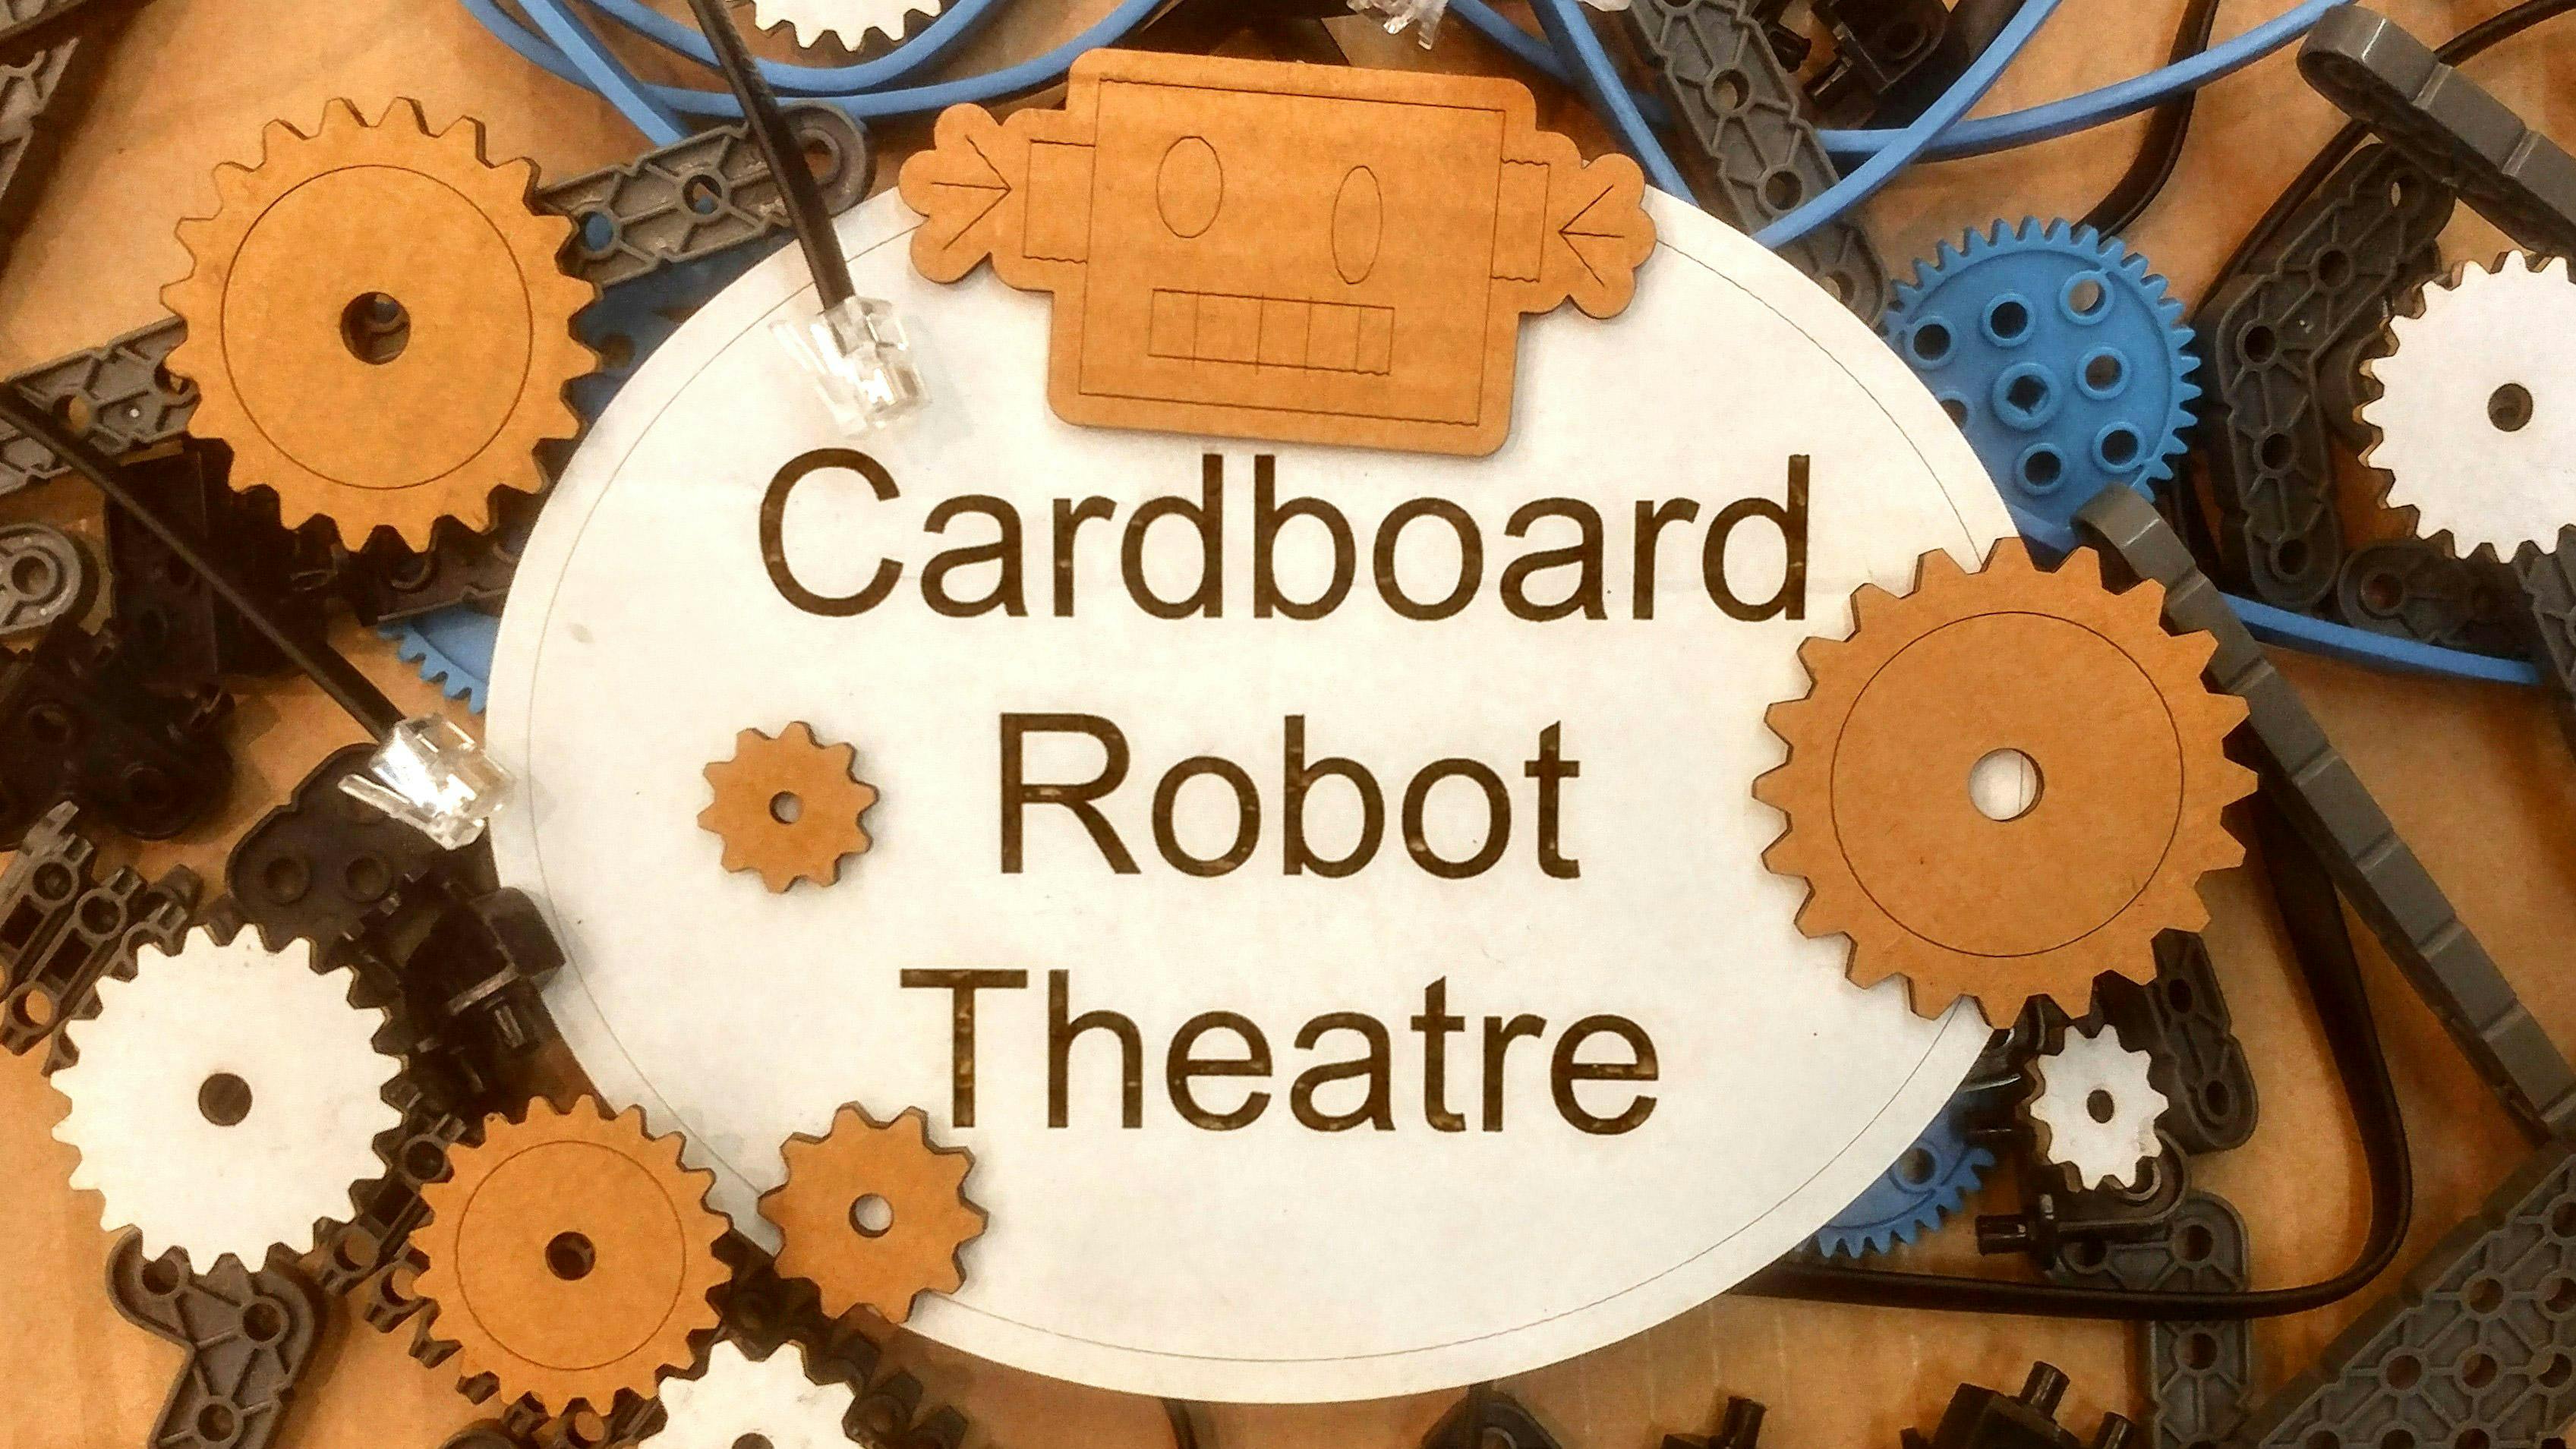 Cardboard Robot Theatre Workshop - all ages welcome!